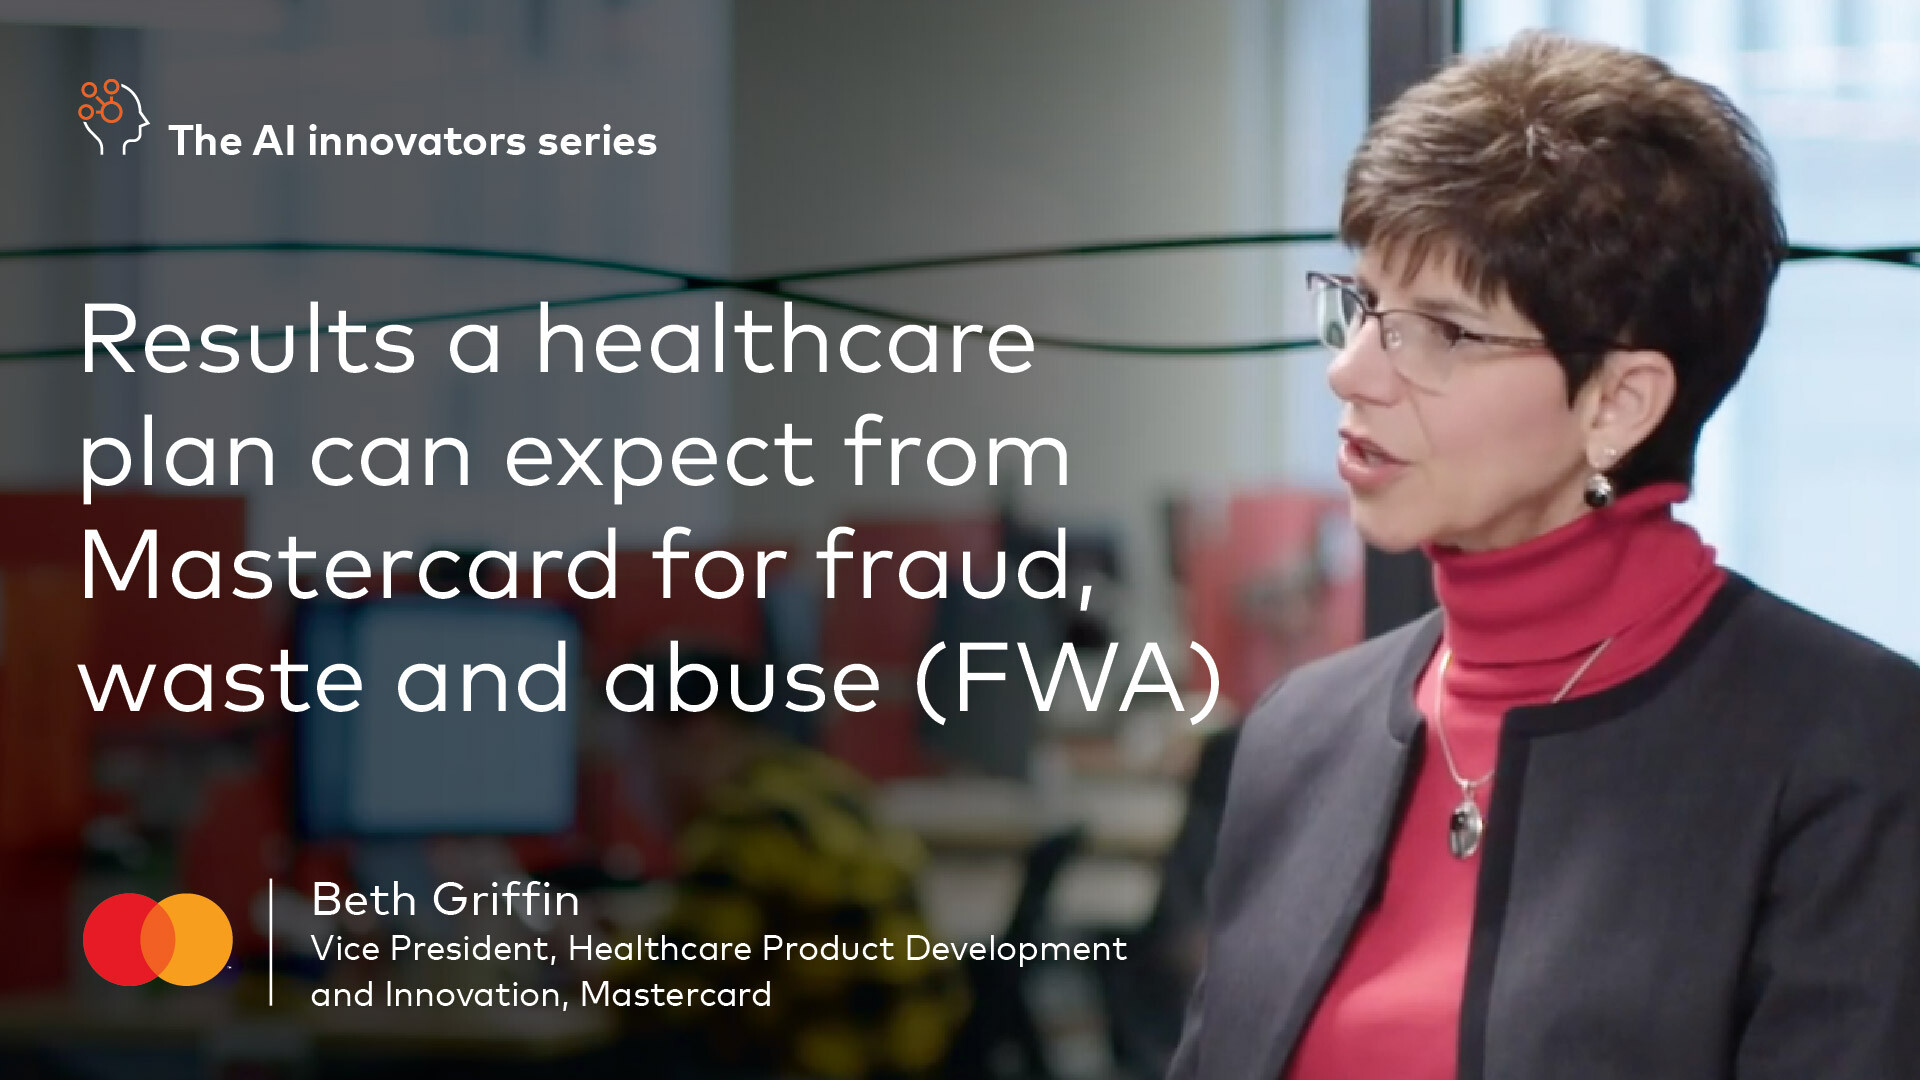 Results a healthcare plan can expect from Mastercard for fraud, waste and abuse (FWA)